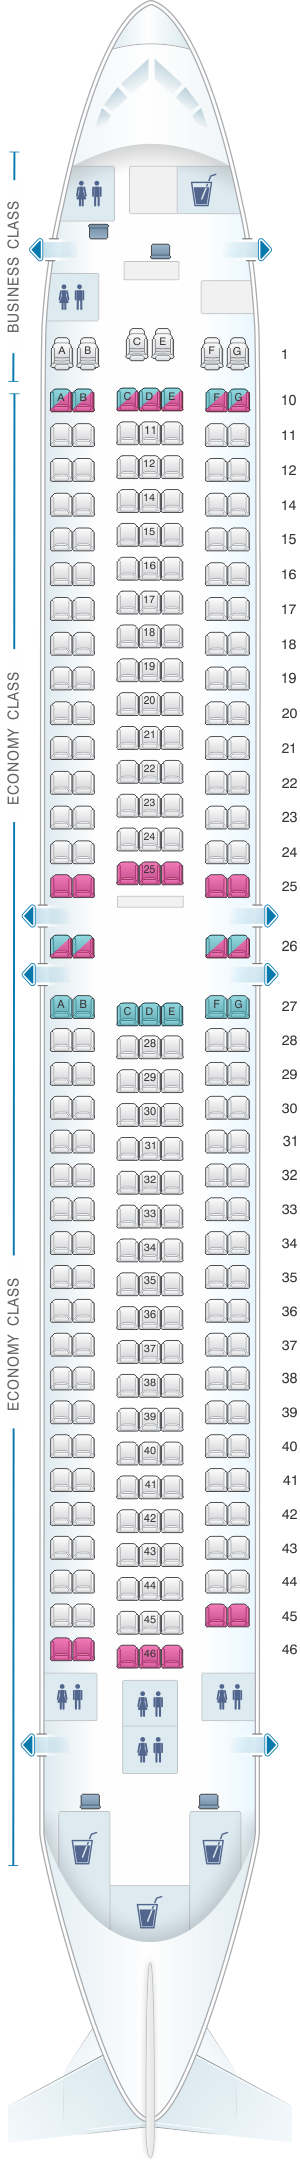 Seat map for Transaero Airlines Boeing B767 300 Config. 6